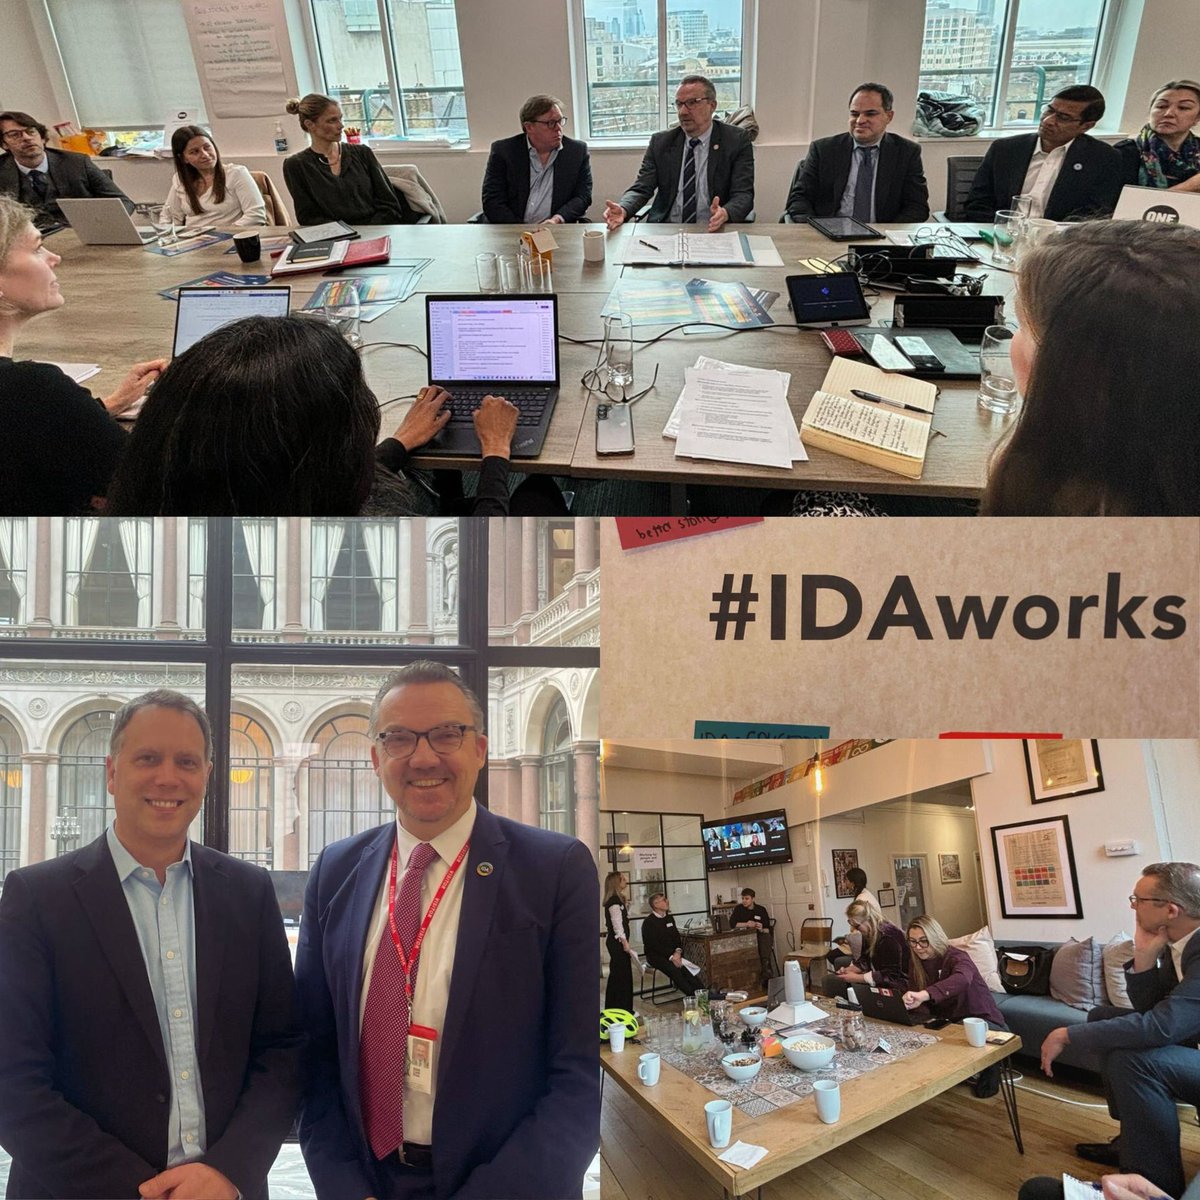 Excellent meetings in London, including w/ @philstevensfcdo @FCDOGovUk + core #IDA21 partners convened by @ONEintheUK. An important message was repeated & reaffirmed across these engagements: @WBG_IDA is a unique, powerful tool that delivers impact and must be bolstered.